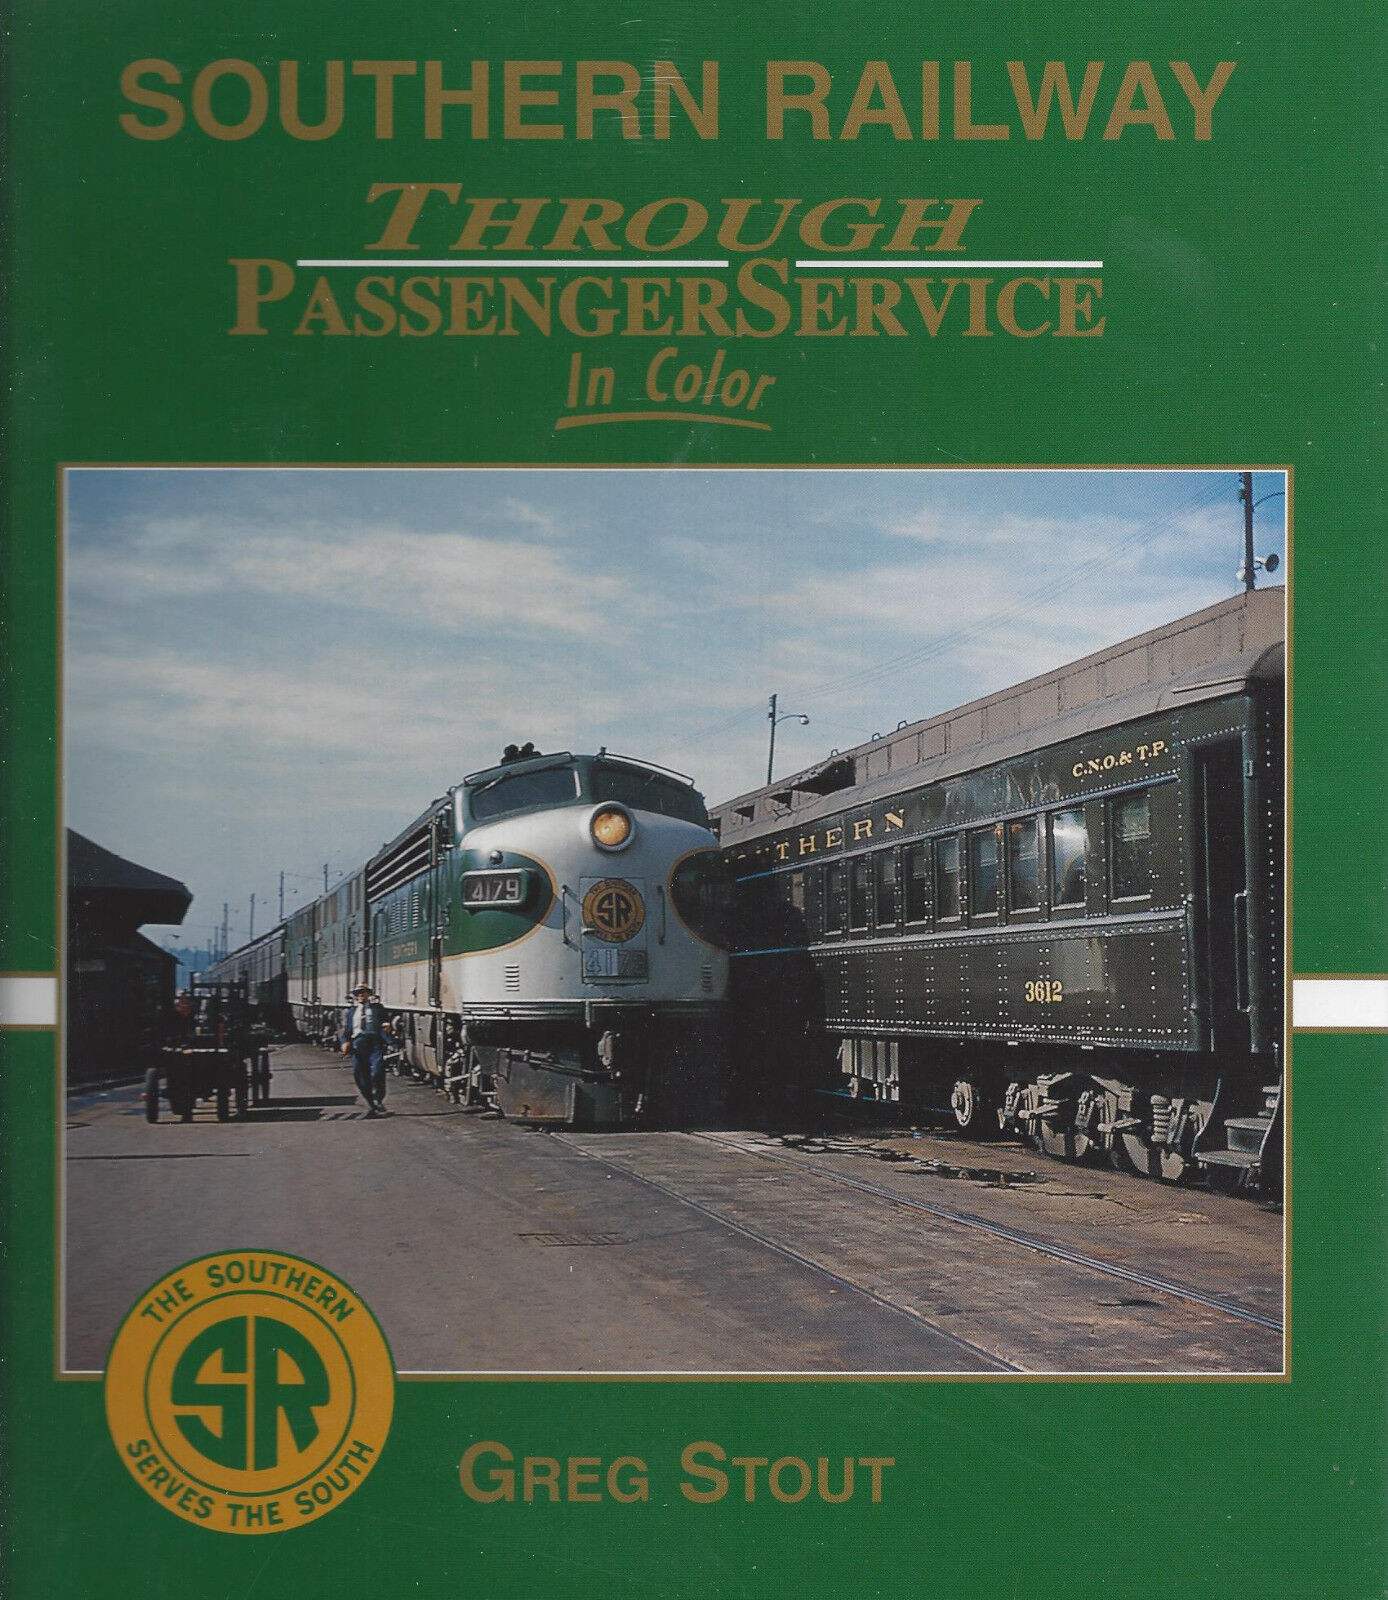 SOUTHERN RAILWAY Through Passenger Service in Color - (LAST BRAND NEW BOOK)